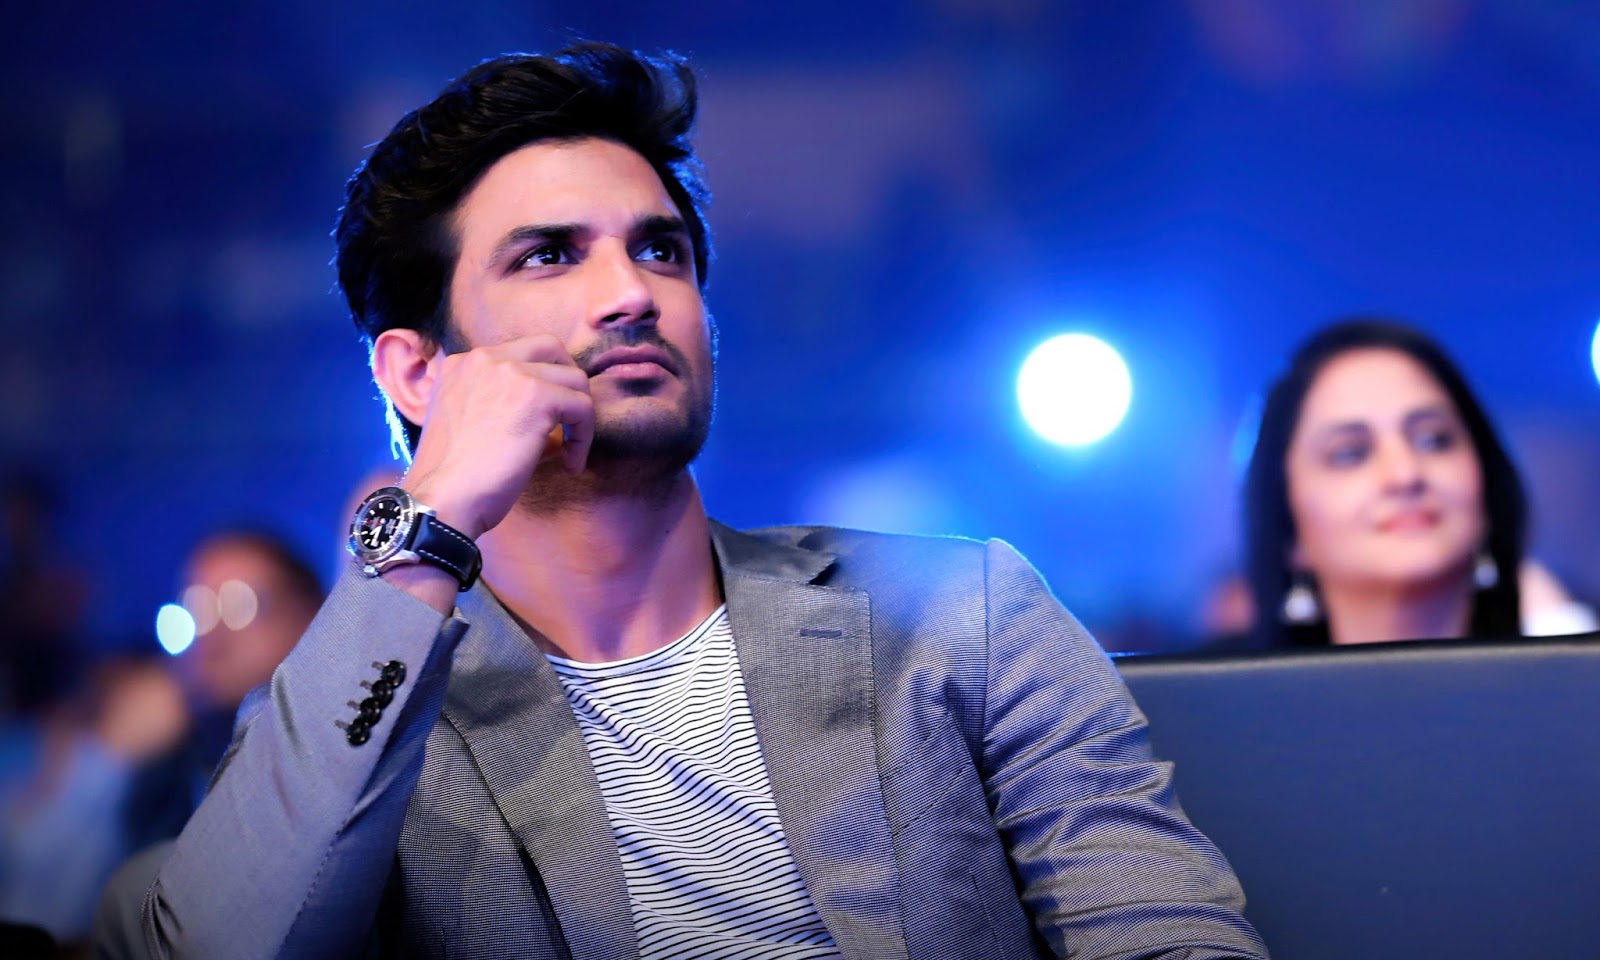 Sushant Singh Rajput's which movie earned the highest with him as a lead actor?